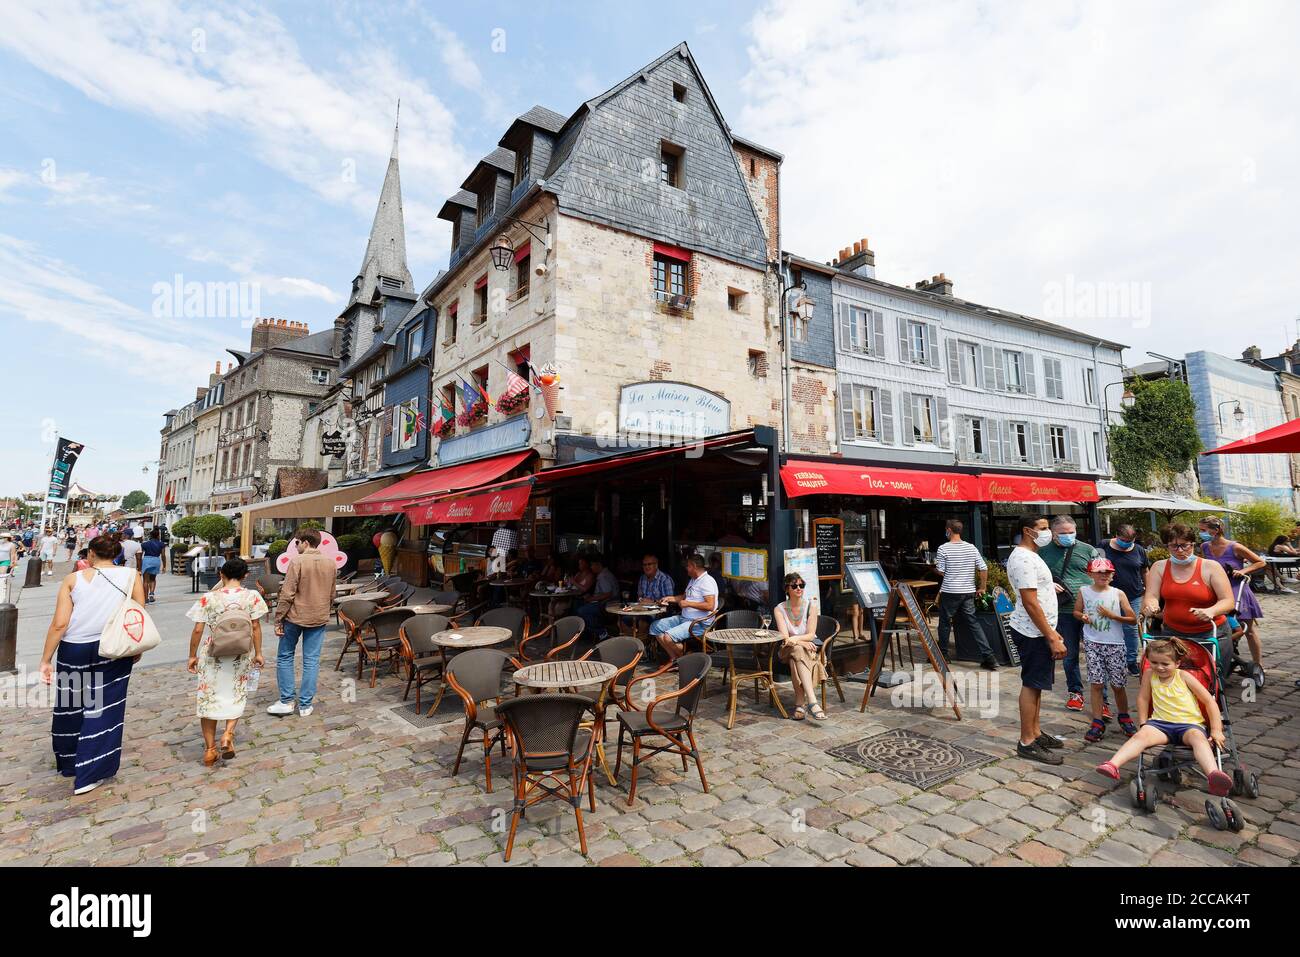 La Maison Bleue is traditional French cafe located in historic centre of Honfleur, the famous resort in Normandy. Stock Photo